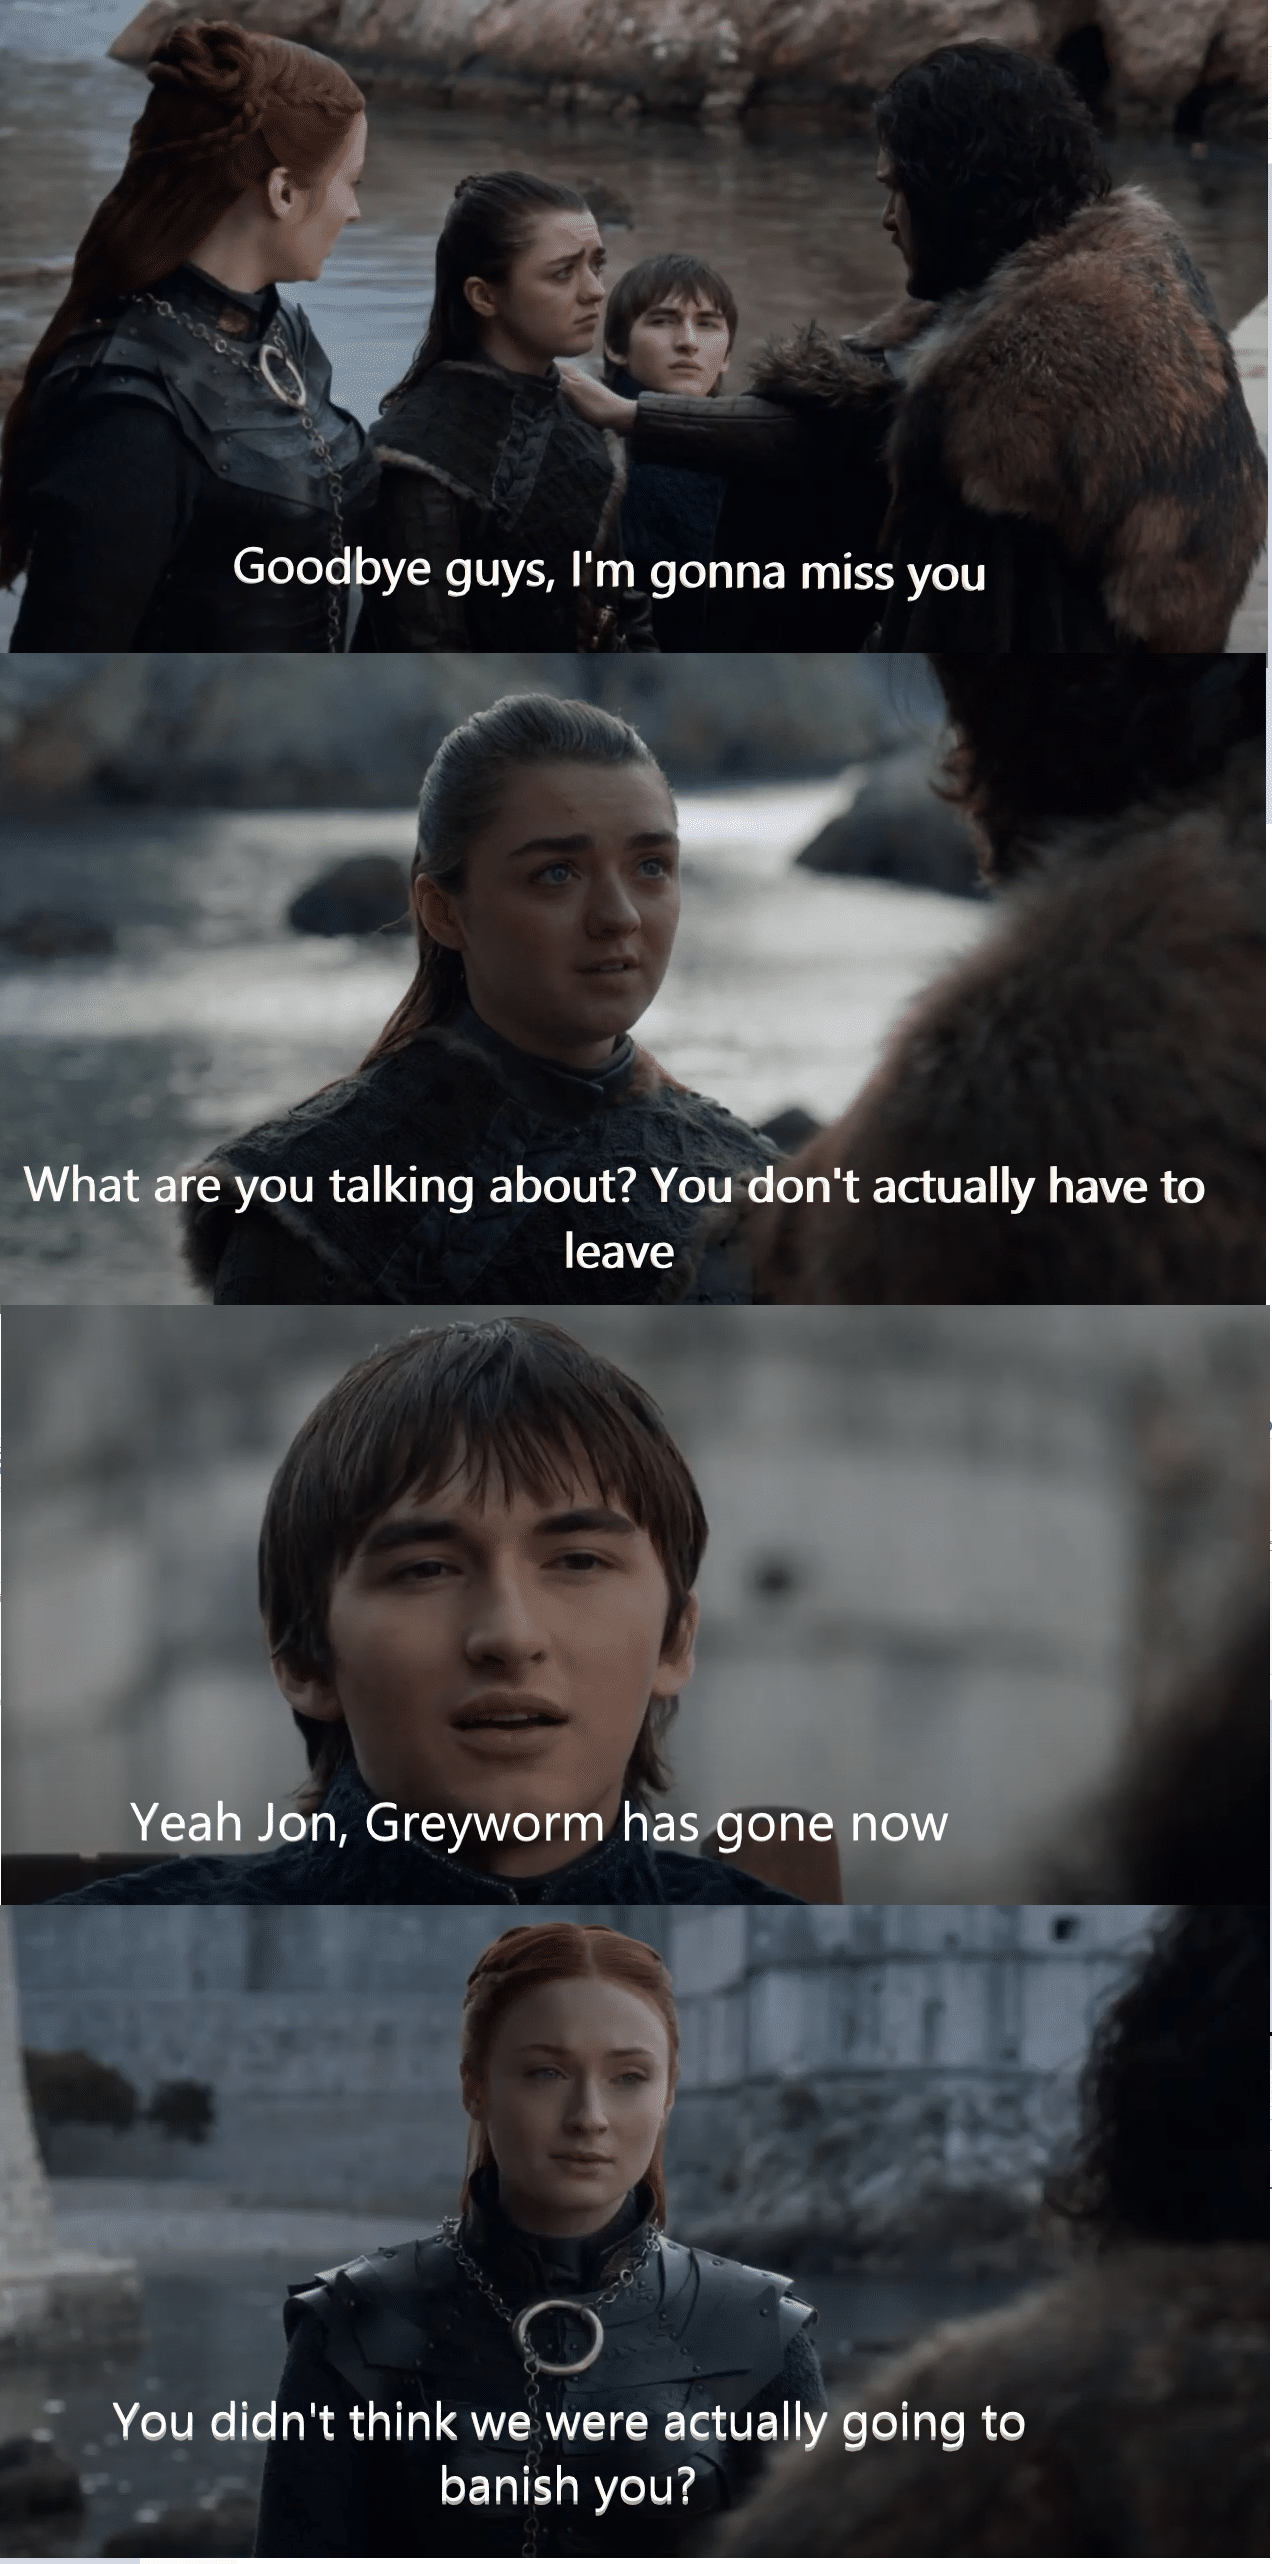 Game of thrones, Jon, North, Sansa, Arya, Bran Game of thrones memes Game of thrones, Jon, North, Sansa, Arya, Bran text: Goodbye guys, I'm gonna miss you What are you talking about? You don't actually have to leave Yeah Jon, Greyworm has gone now You didn't think we were actually going to banish you? 